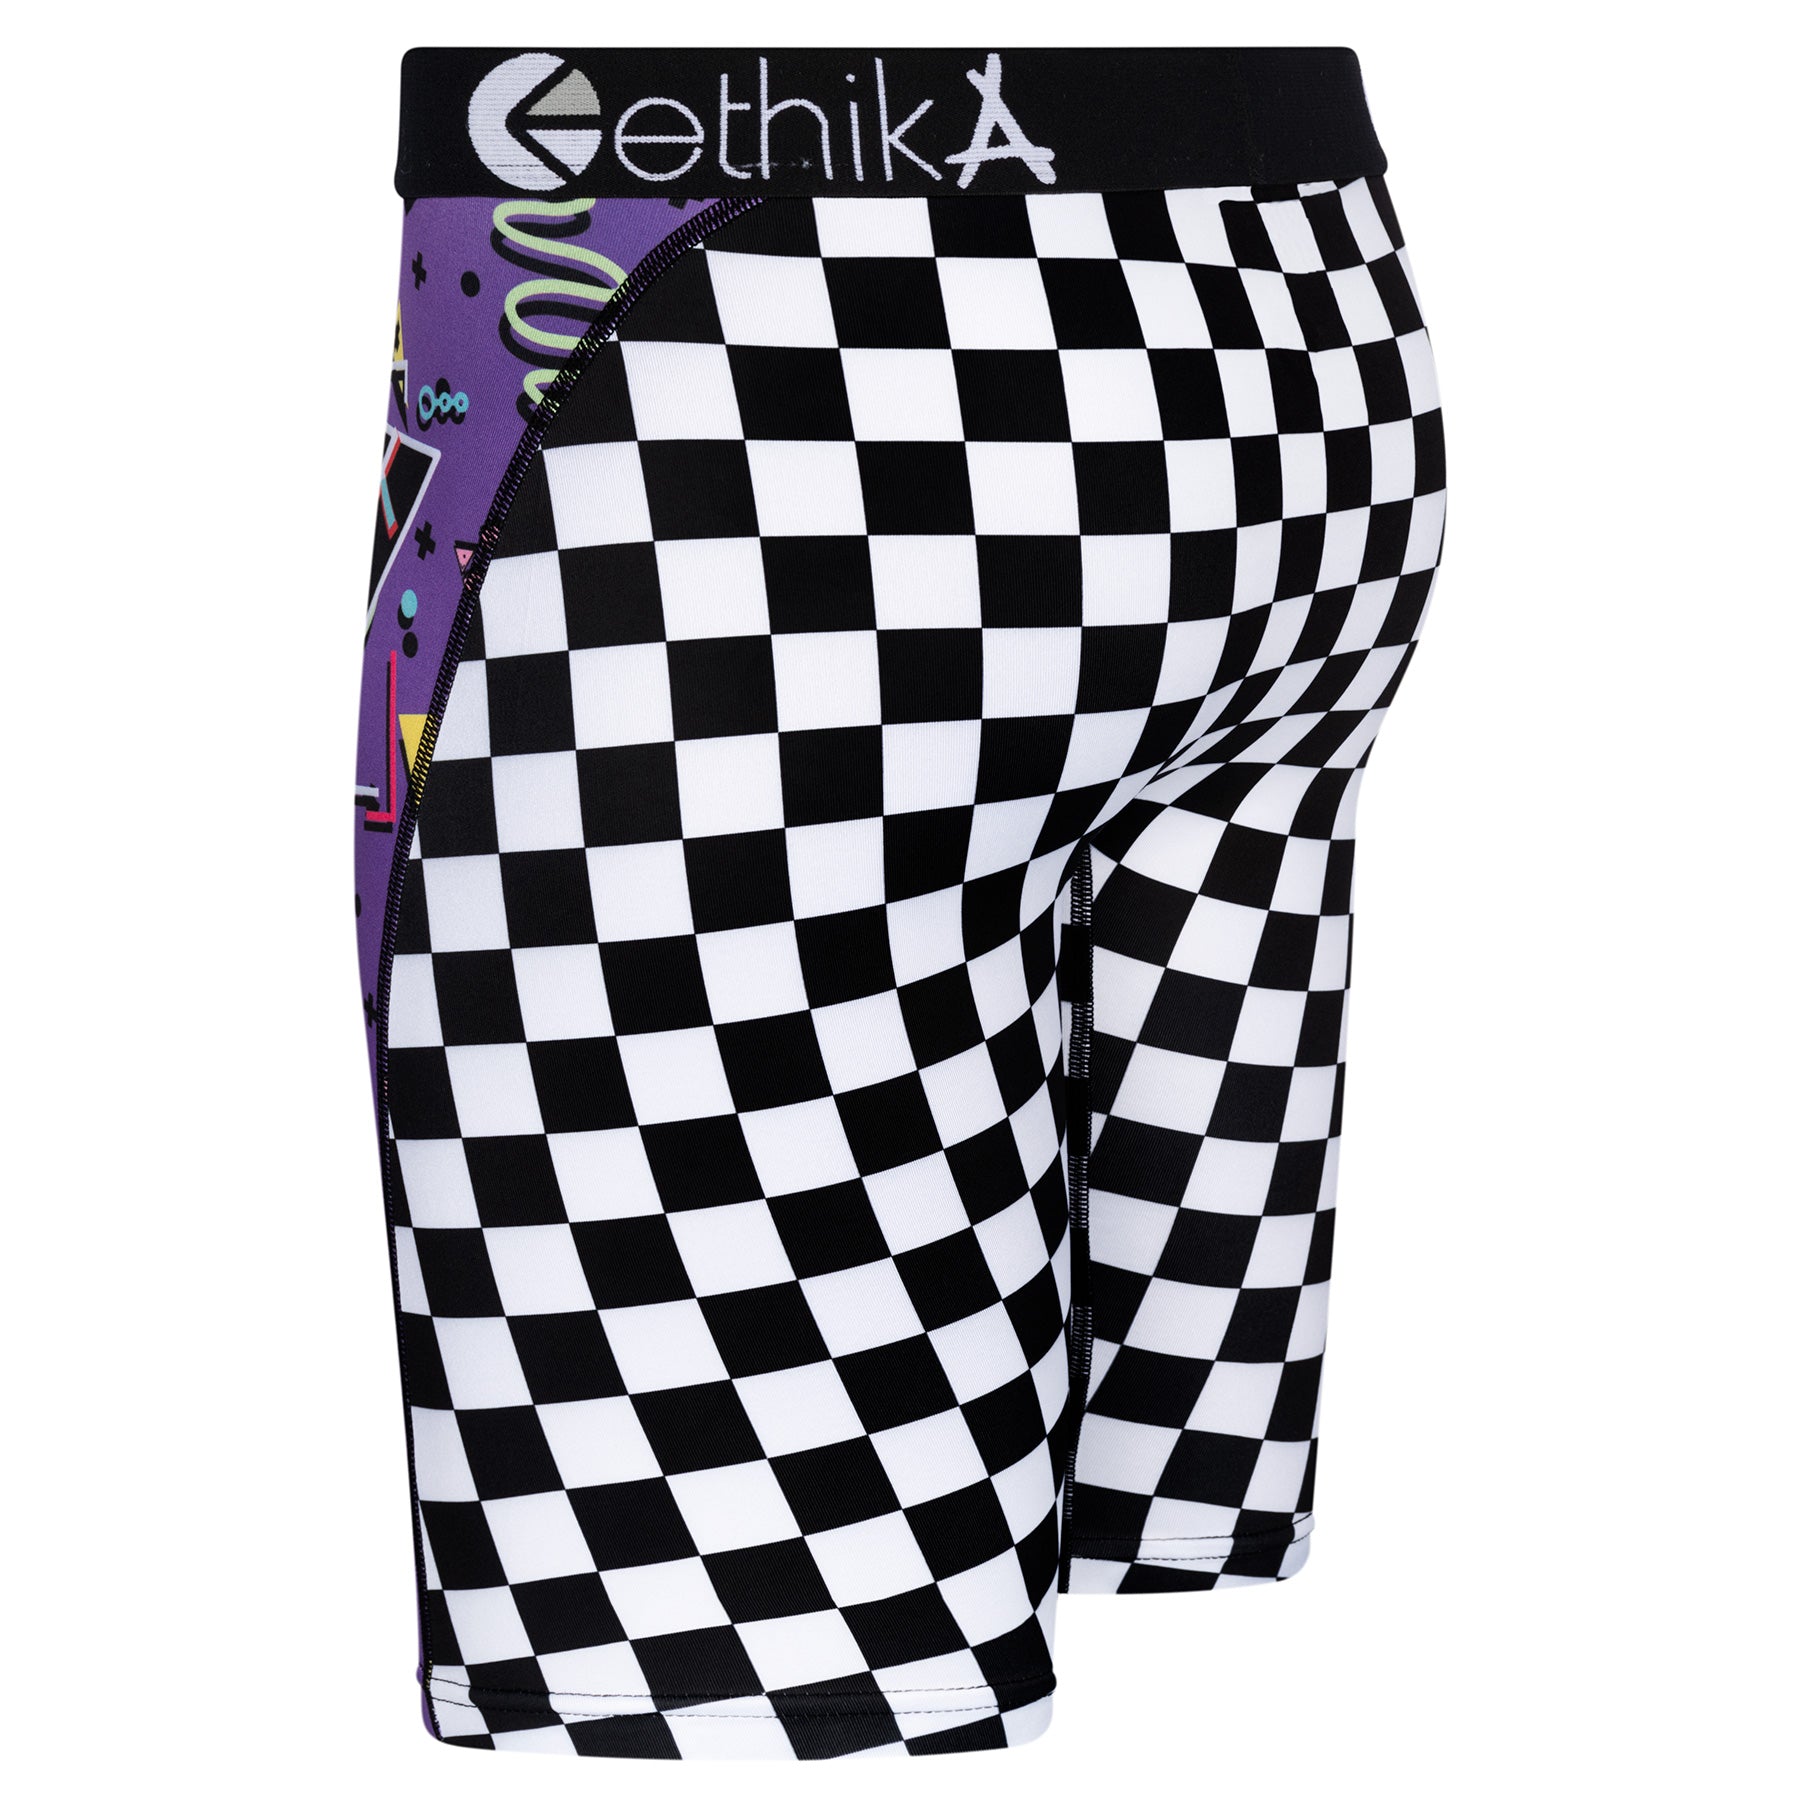 Black Ethika Womens Underwear South Africa Factory Outlet - Ethika